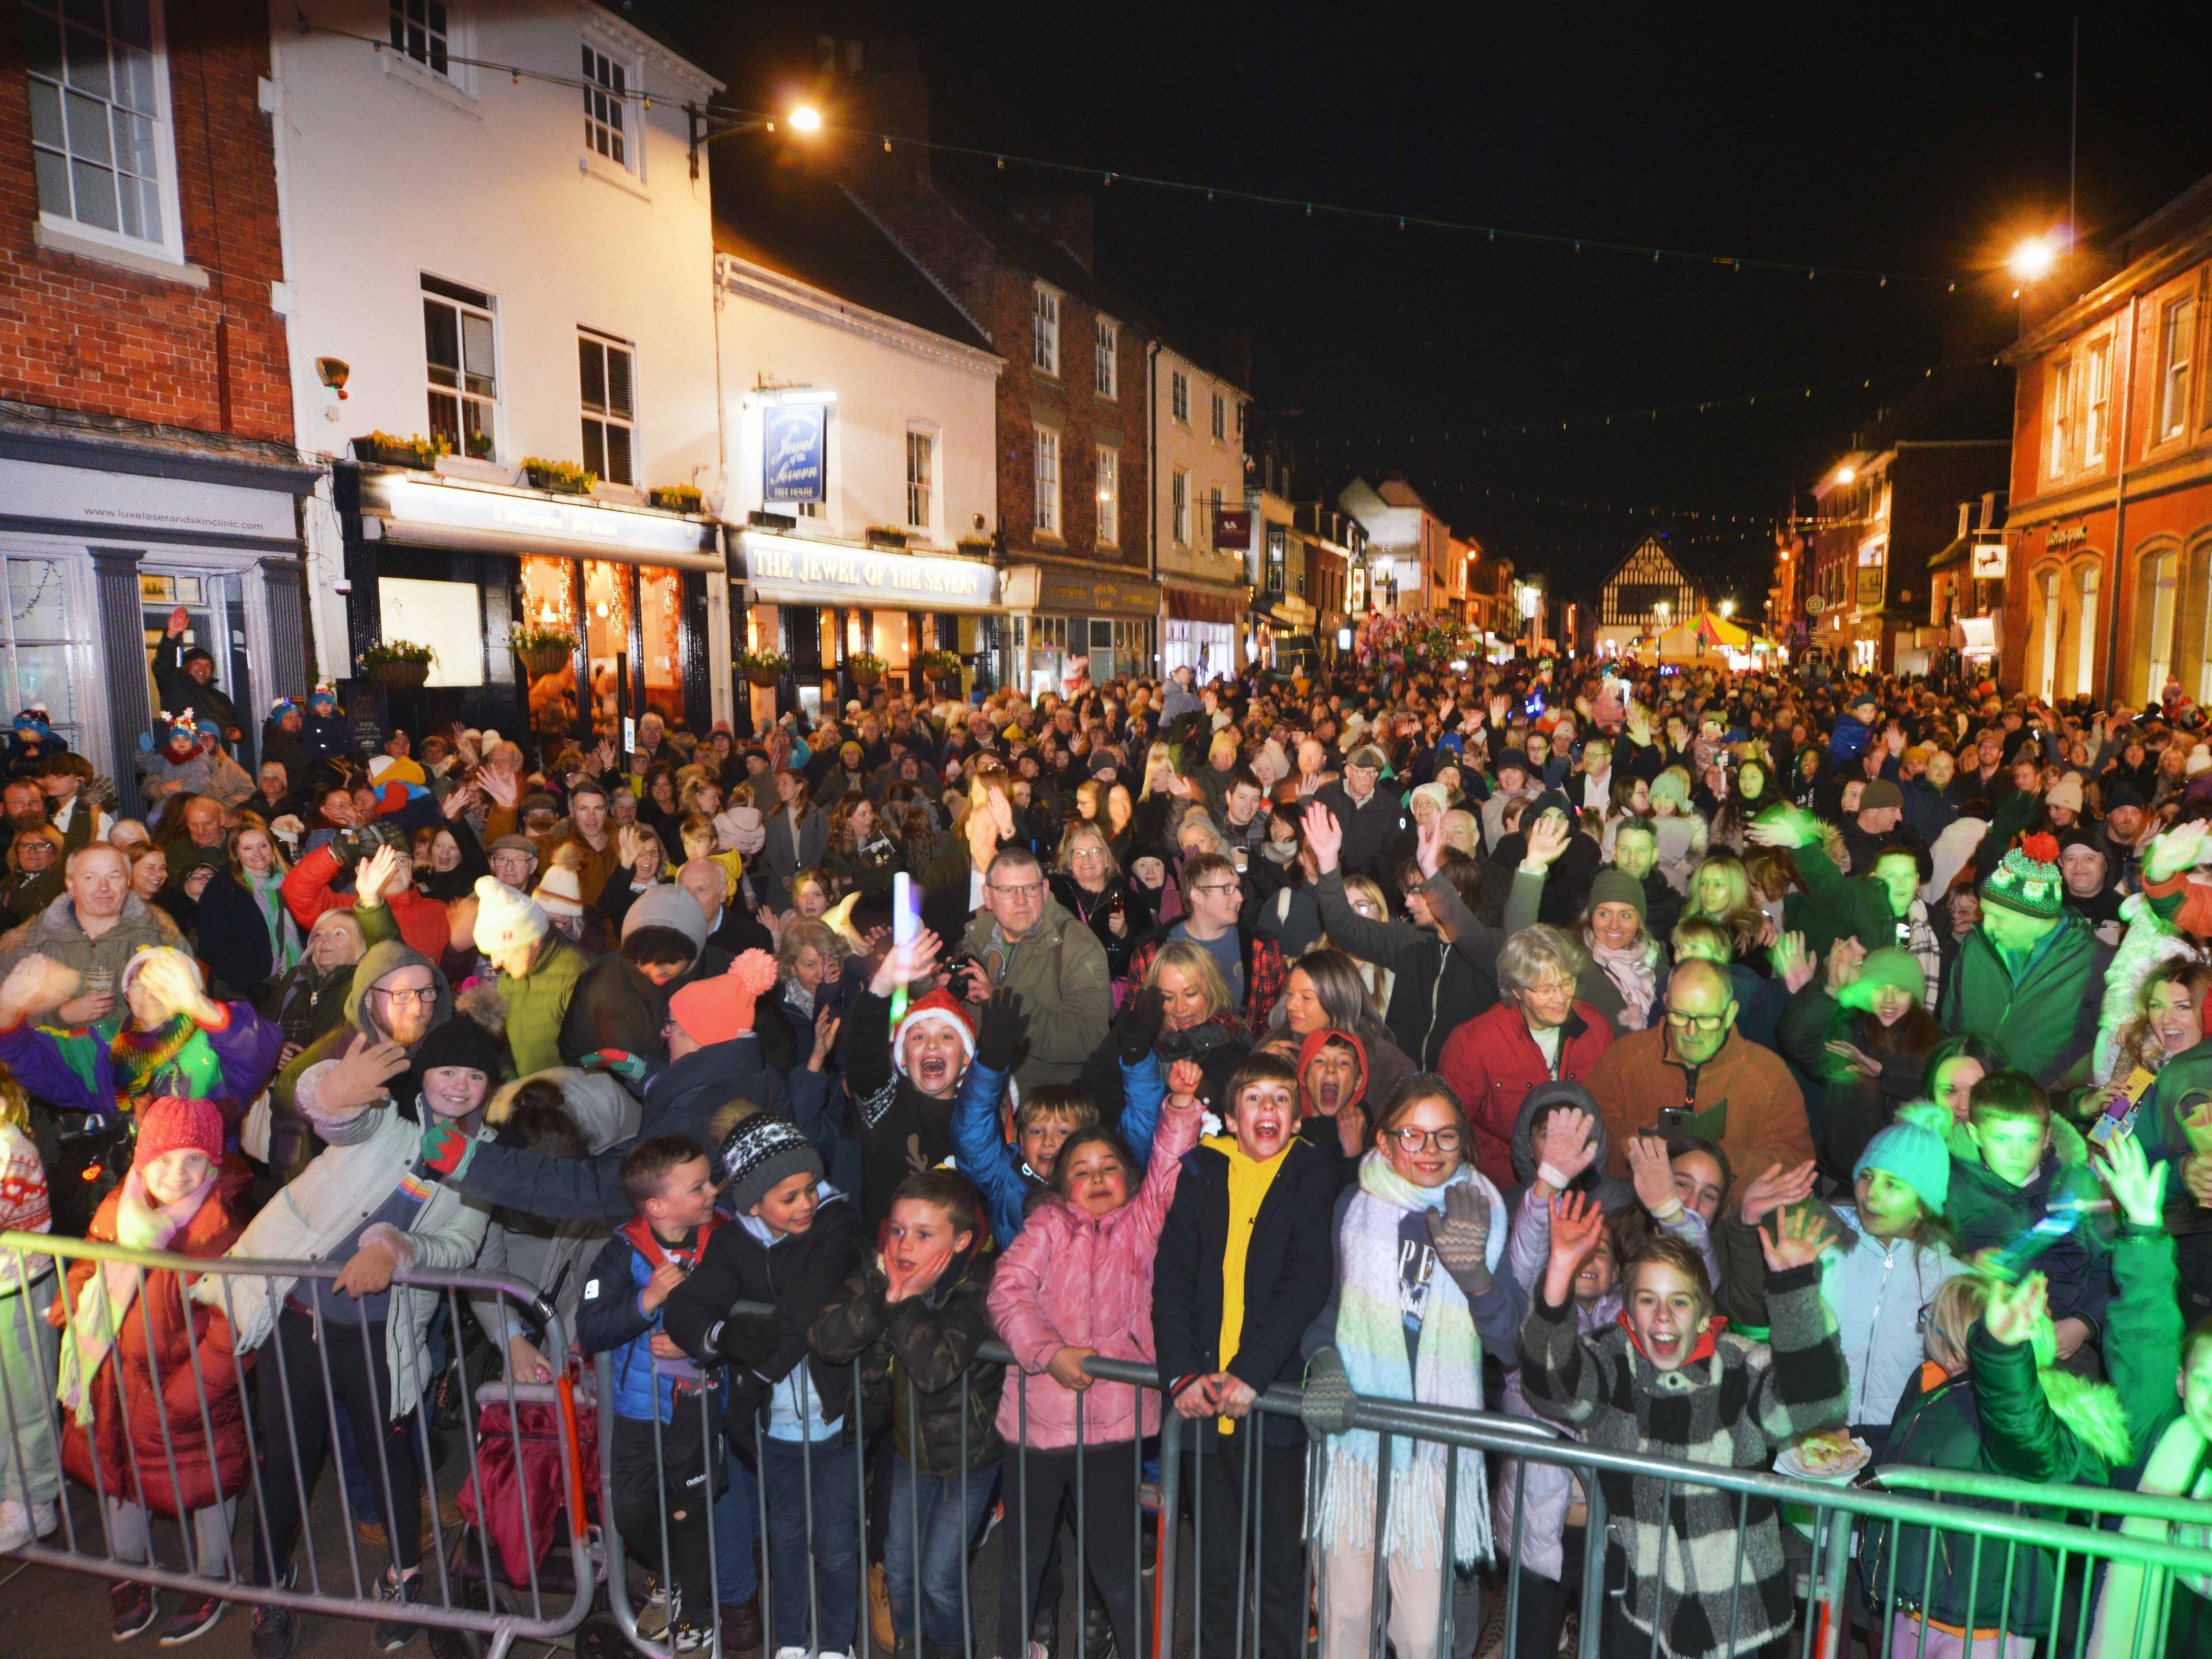 Bridgnorth High Street packed as thousands turn out for Christmas lights switch-on